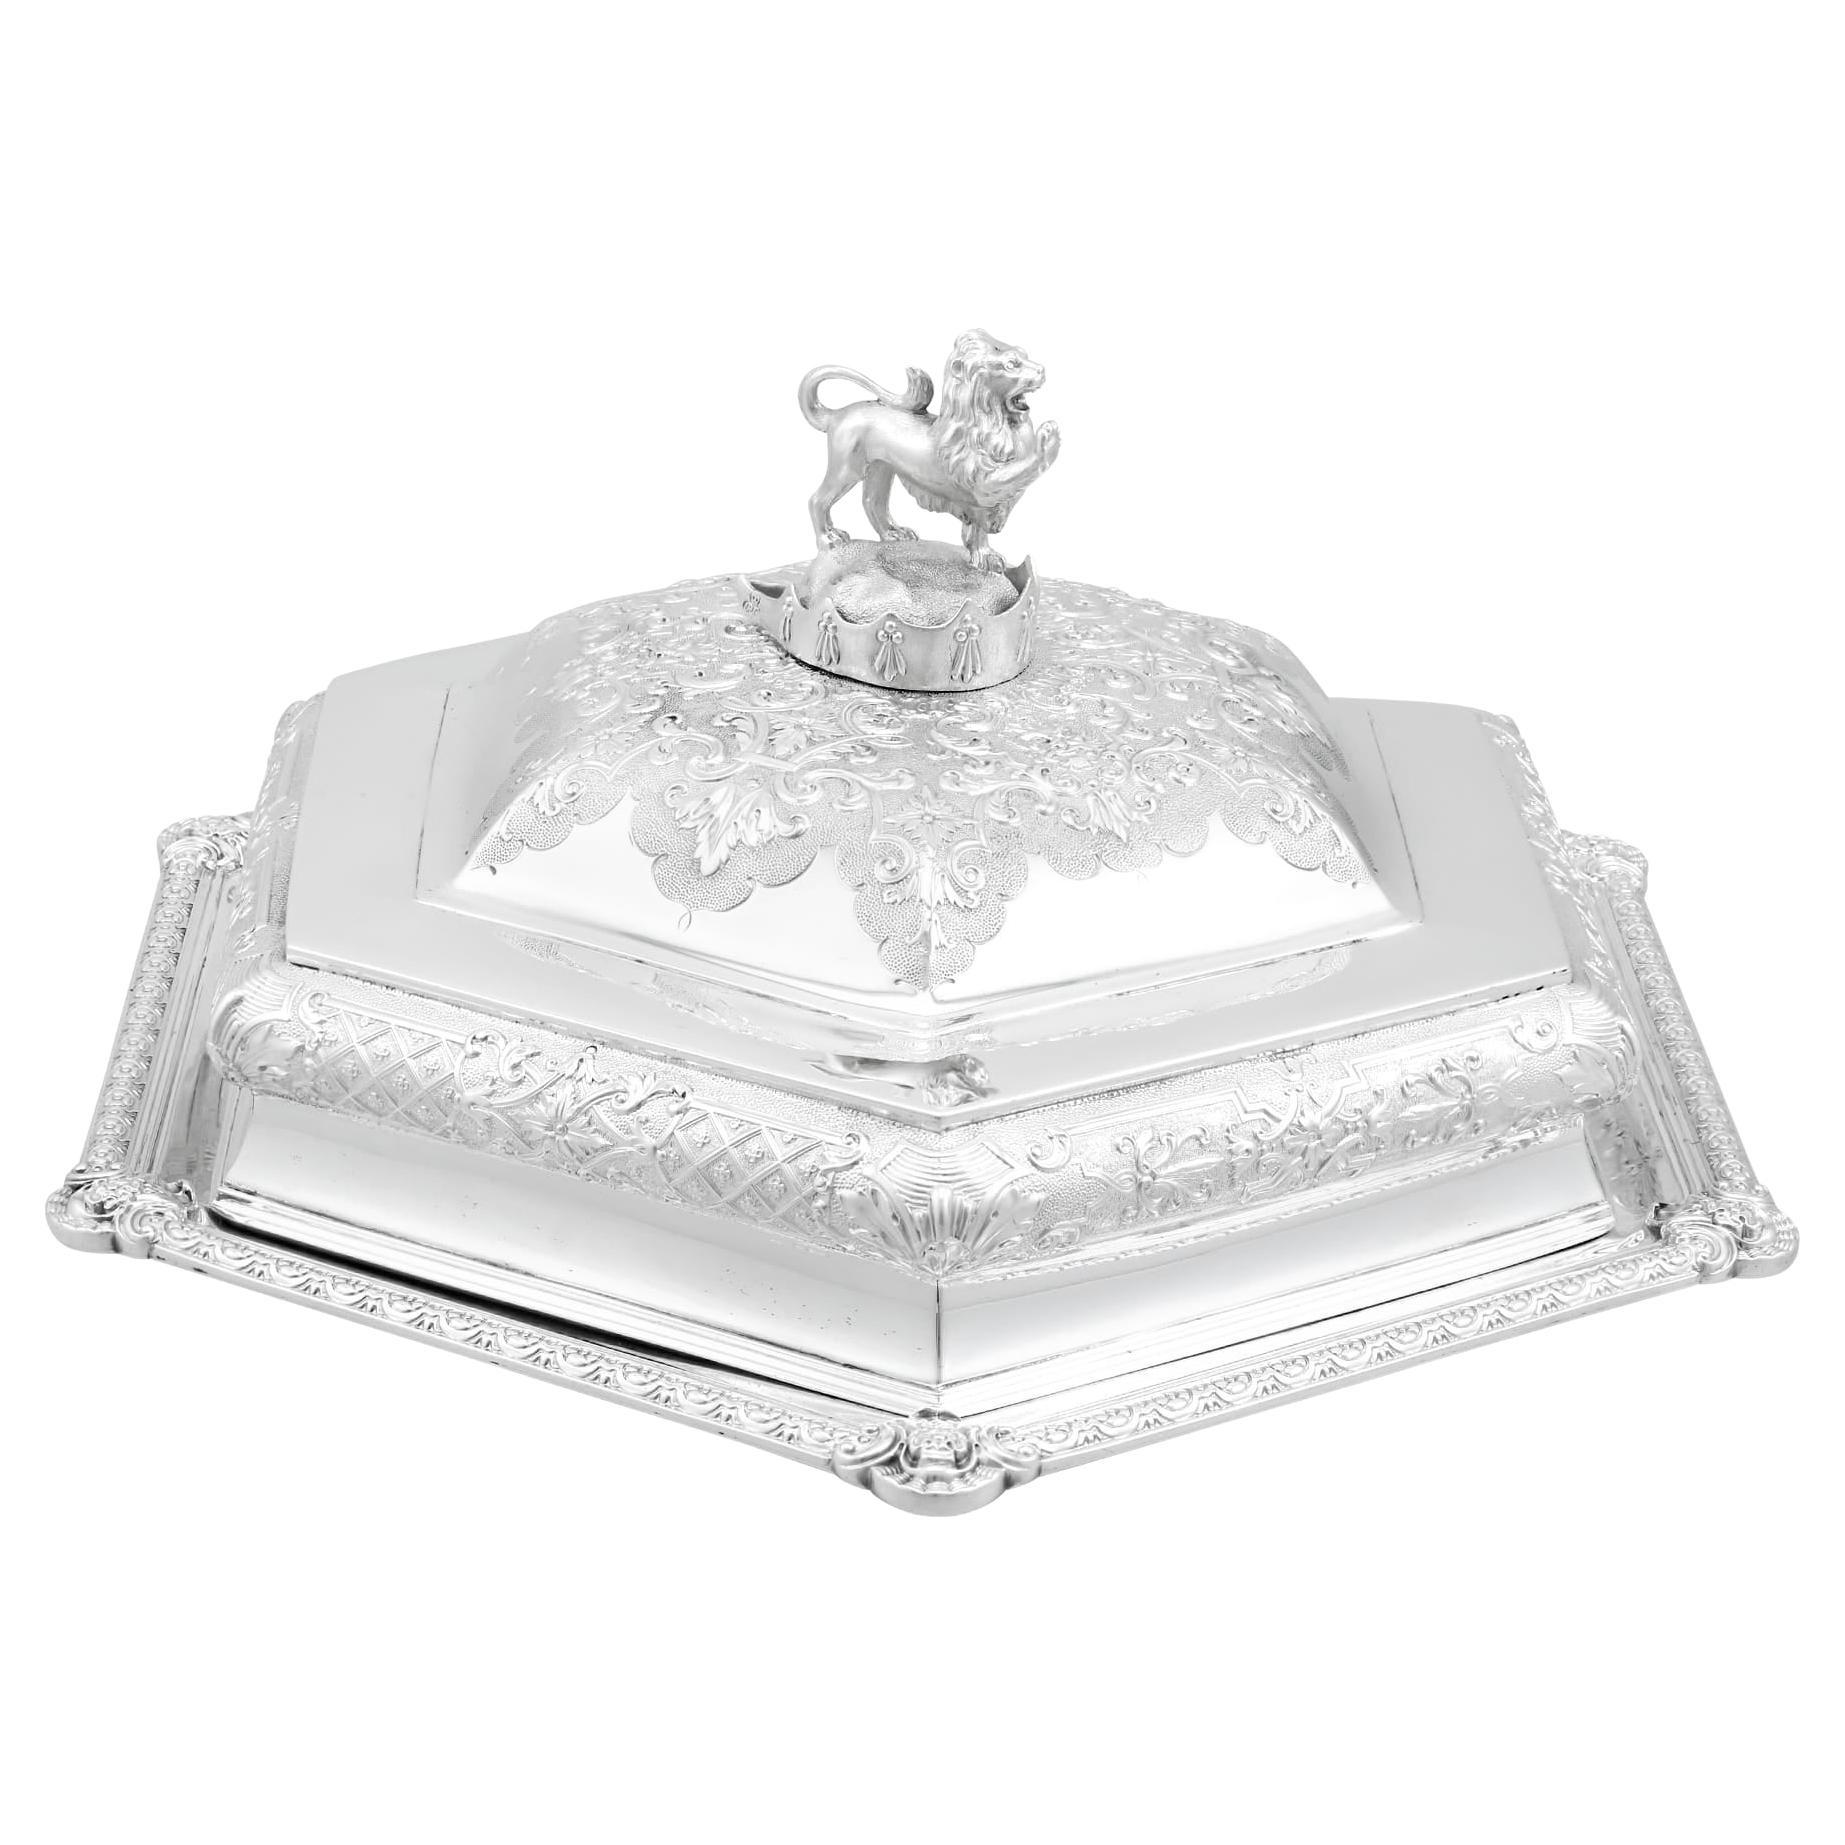 Antique Sterling Silver Covered Serving Dish by Robert Garrard II For Sale